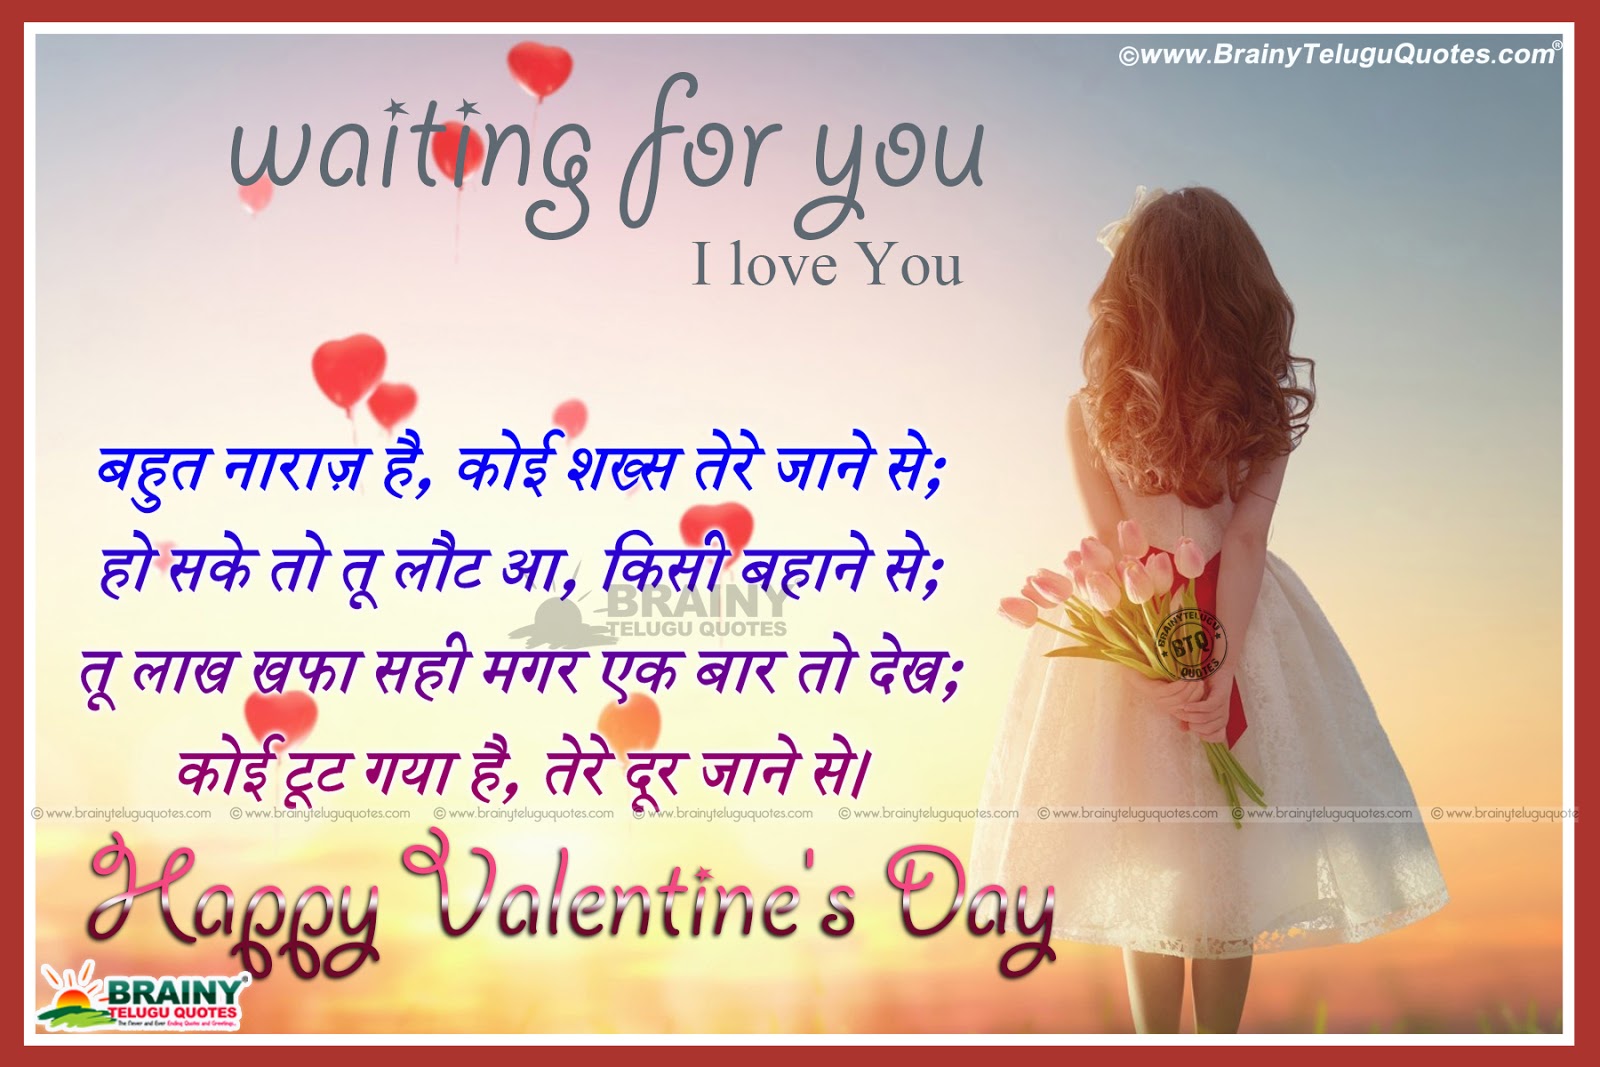 Valentines Day Hindi Whatsapp DP Profile Pictures & Single Line Status